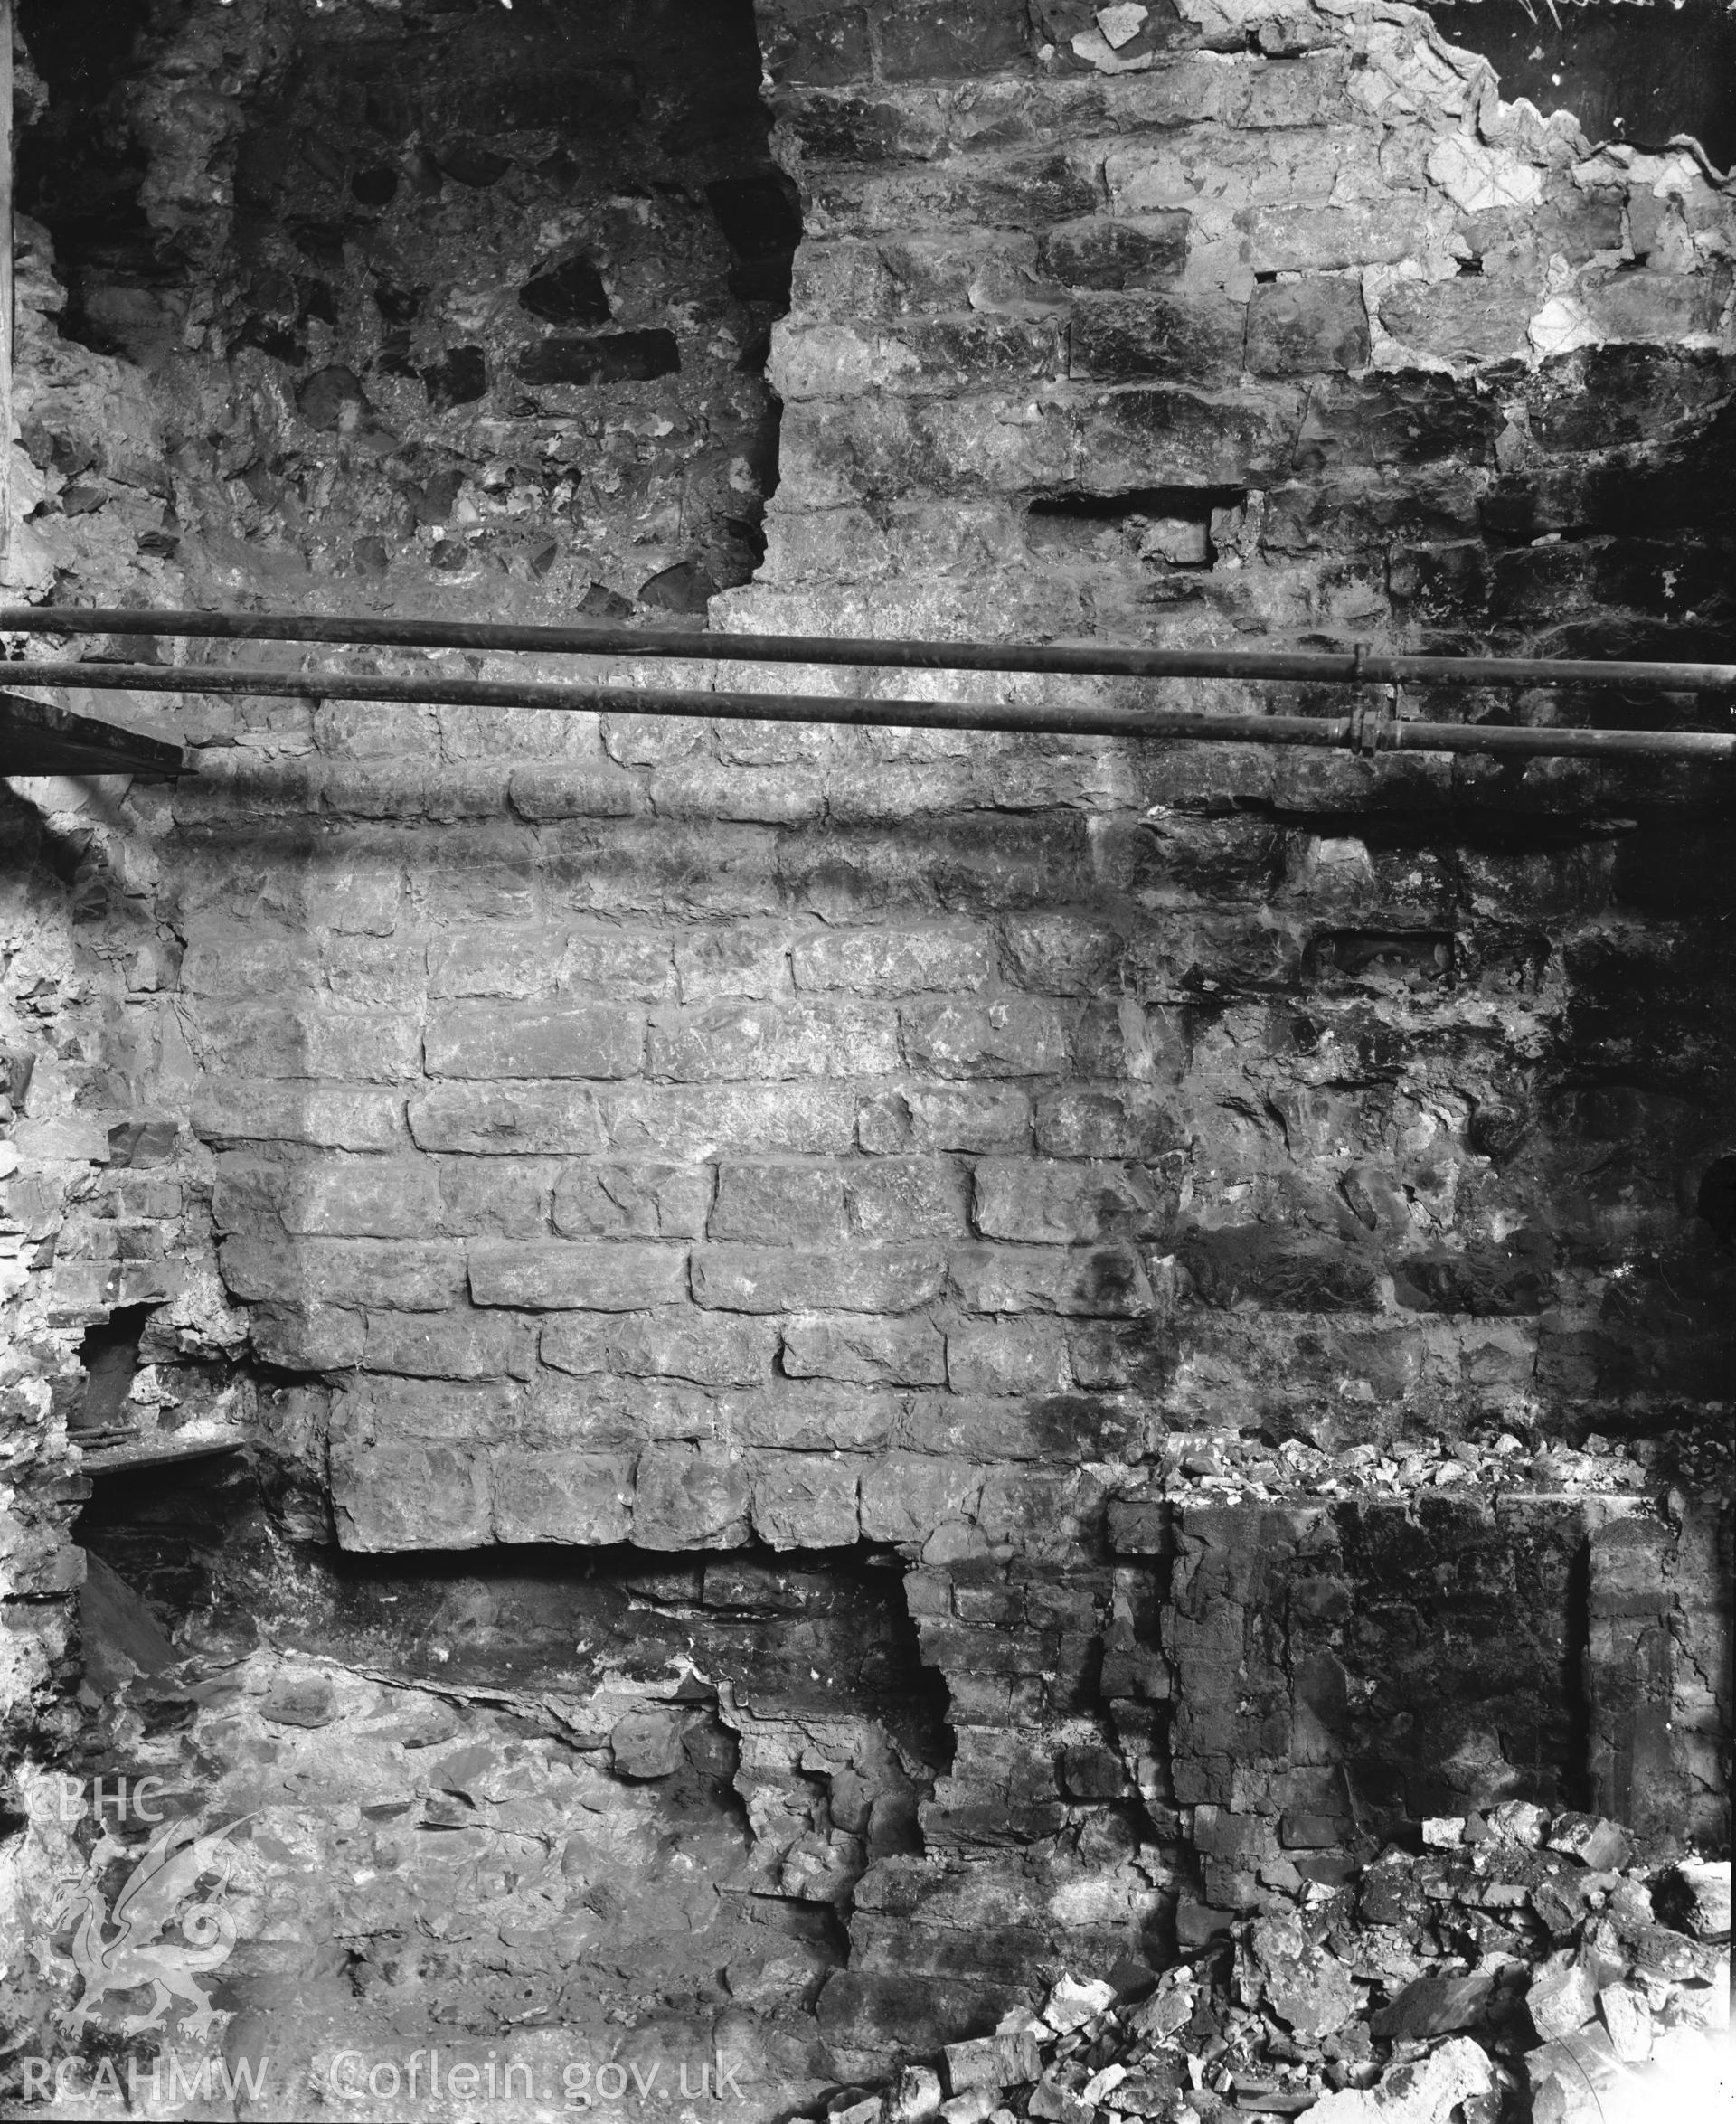 Cardiff Castle Roman Wall - Kitchen. Ministry of Works Coll. NAccp154-158